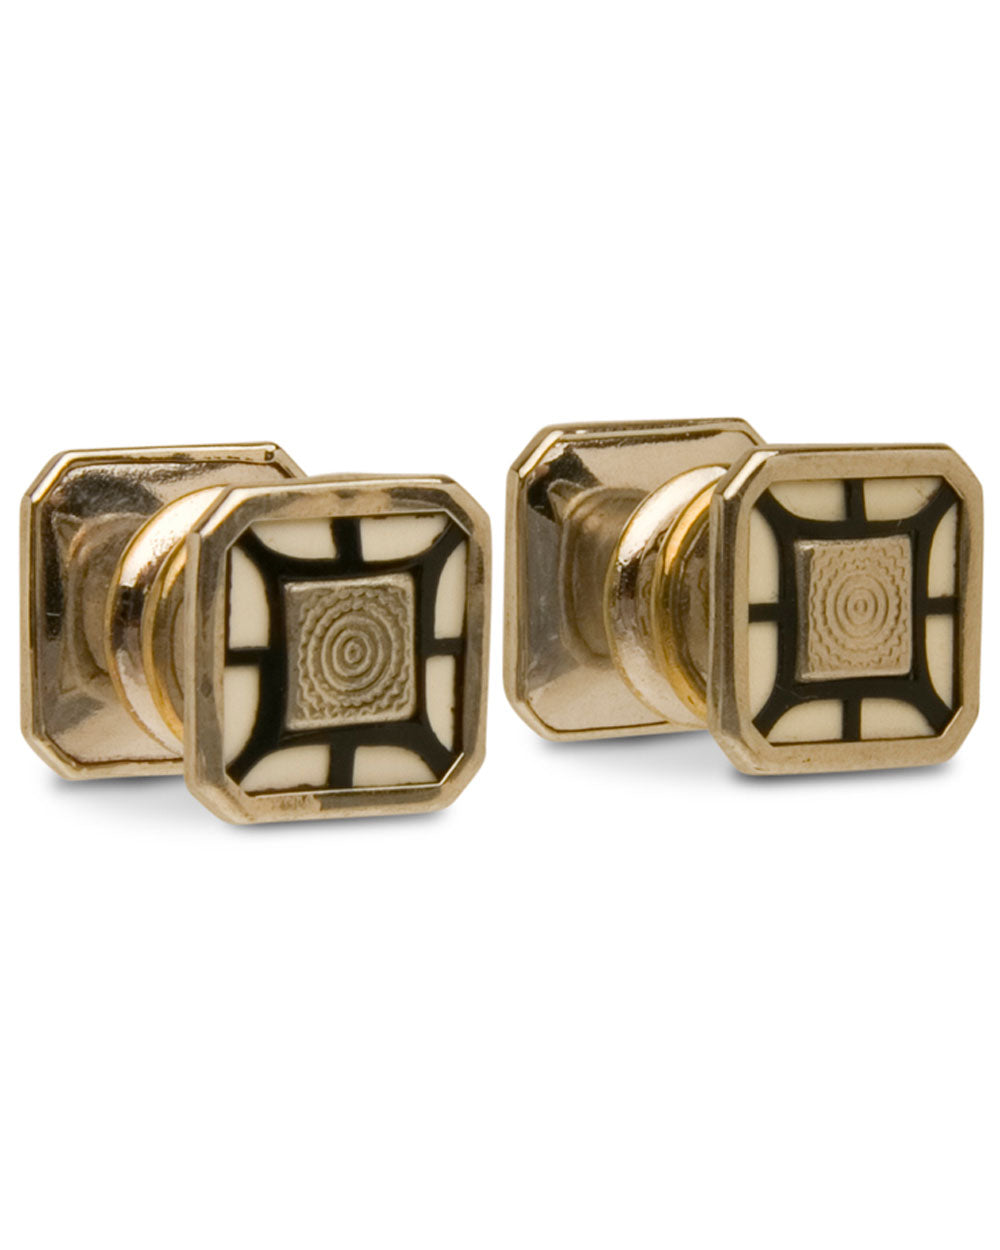 Sterling Silver White Gold Celluloid Snap Cufflinks